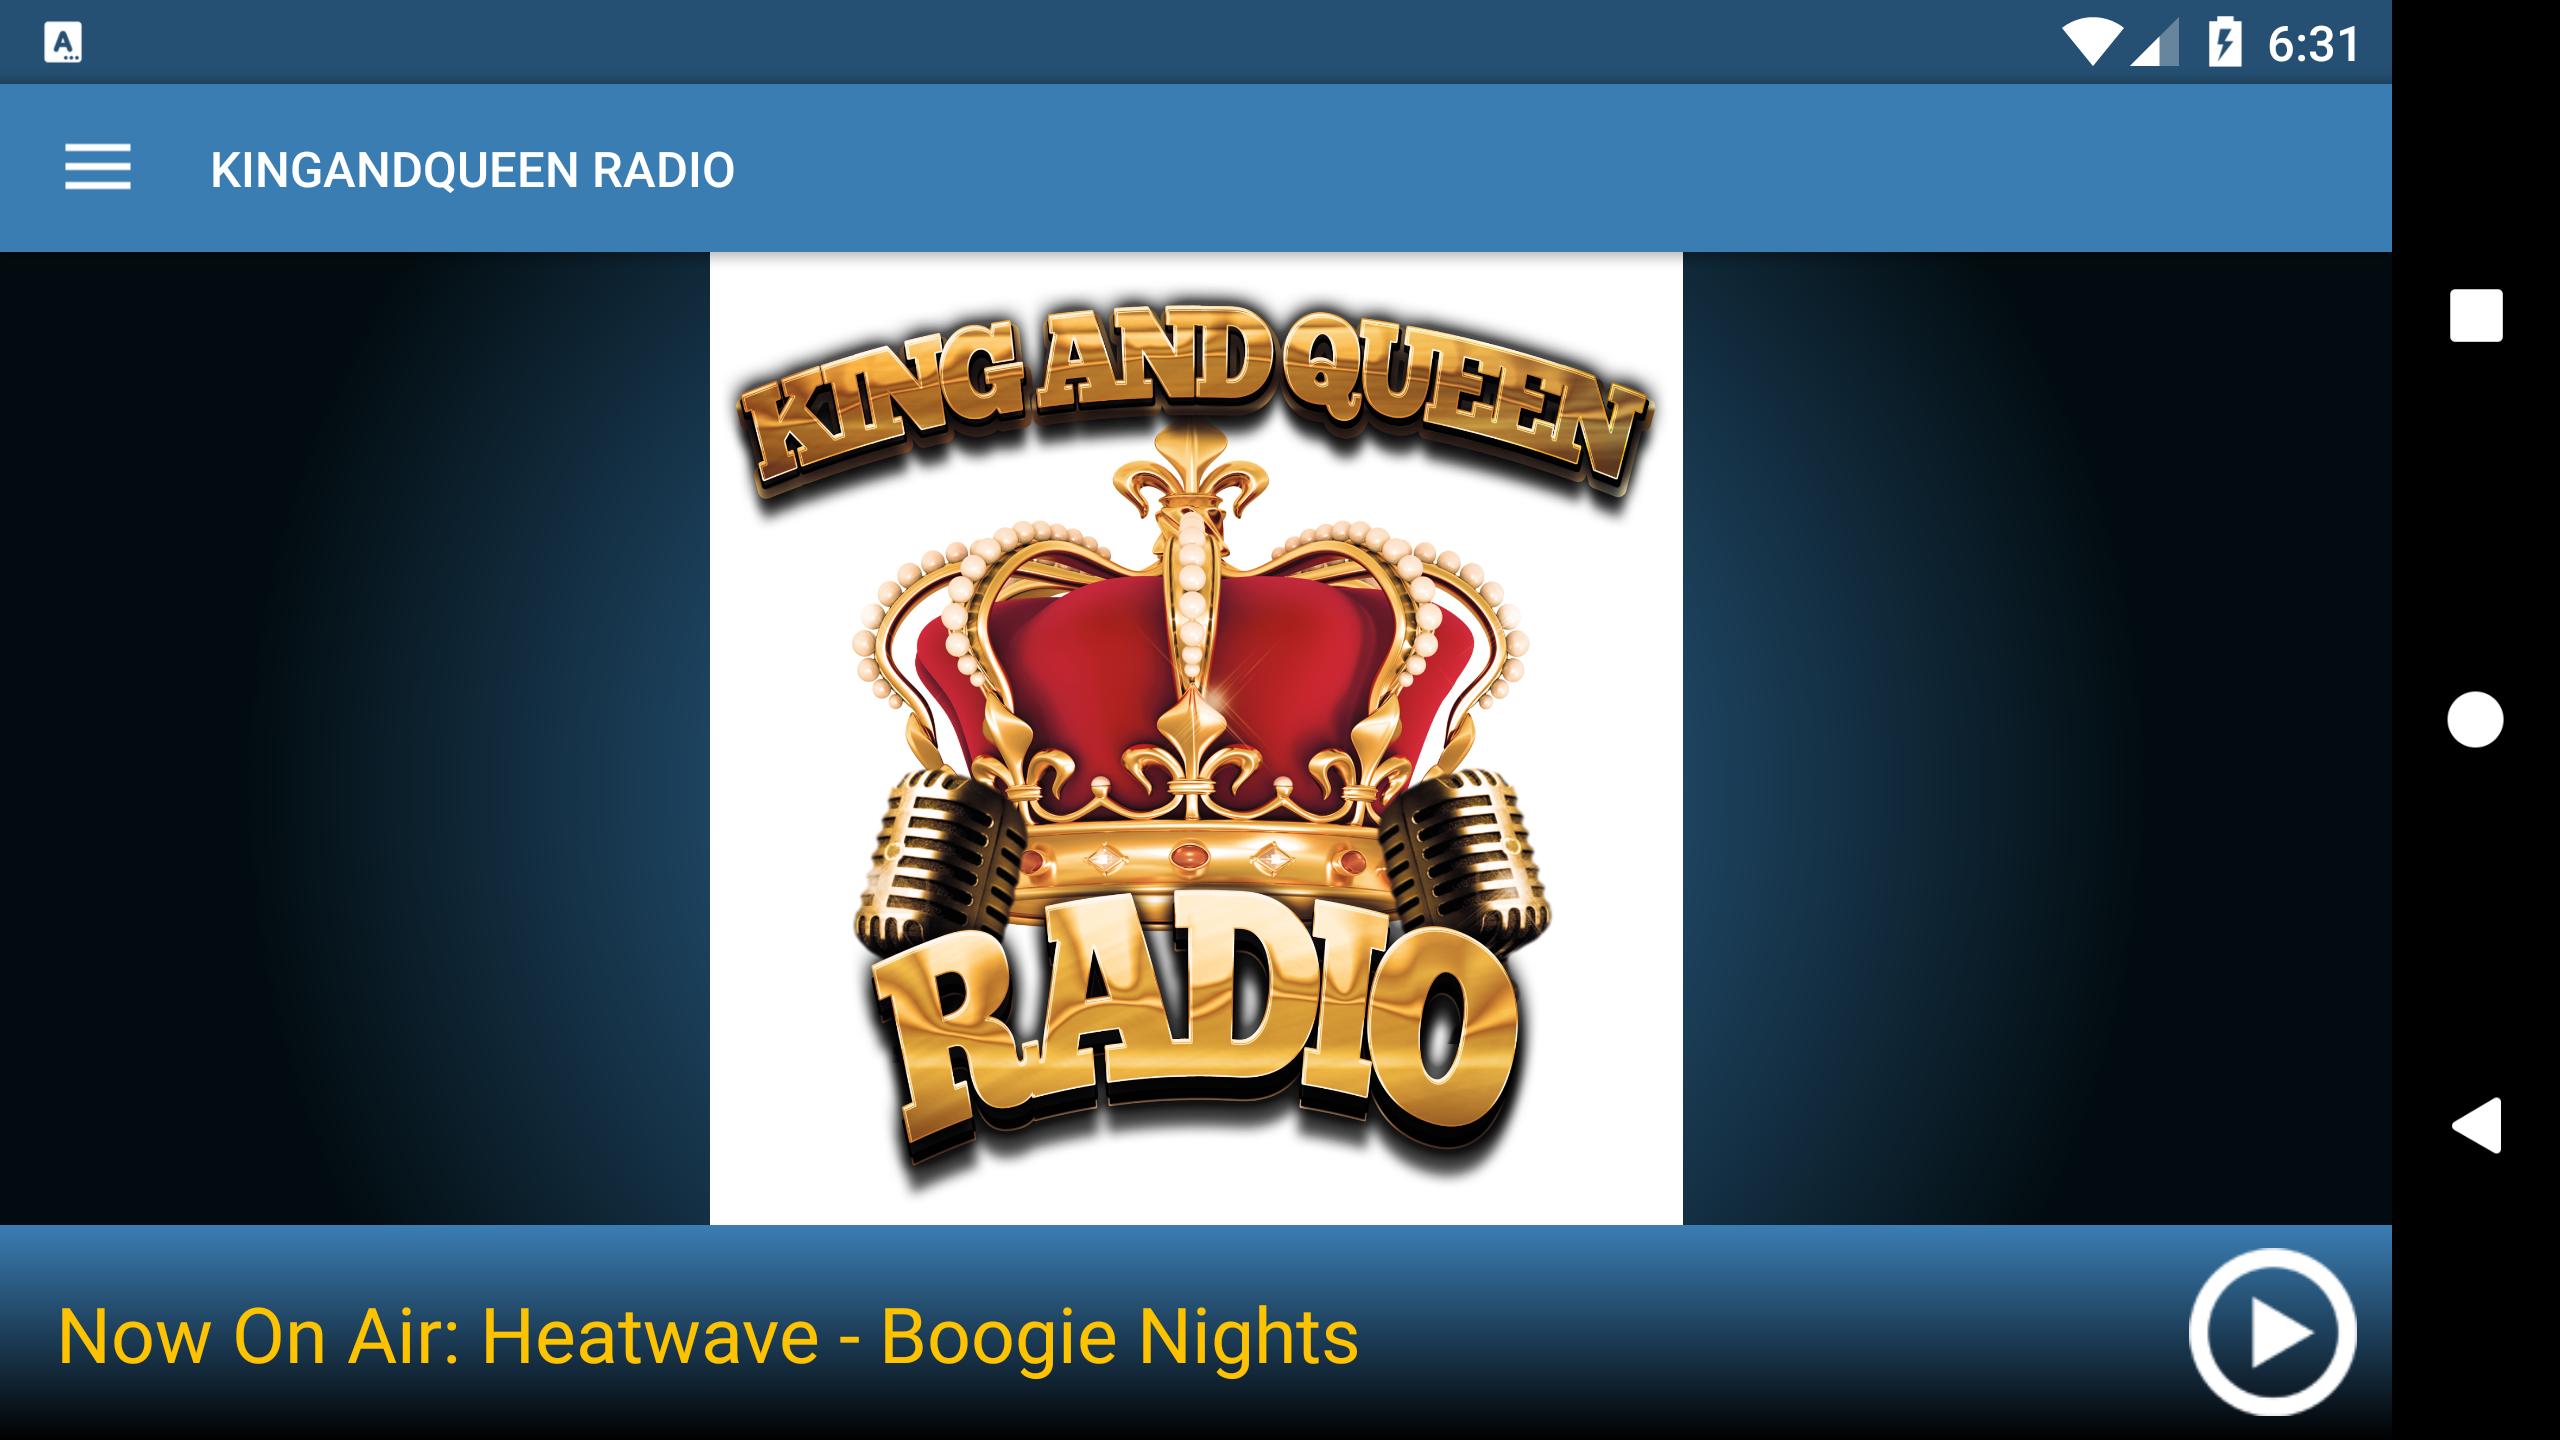 King And Queen Radio for Android - APK Download